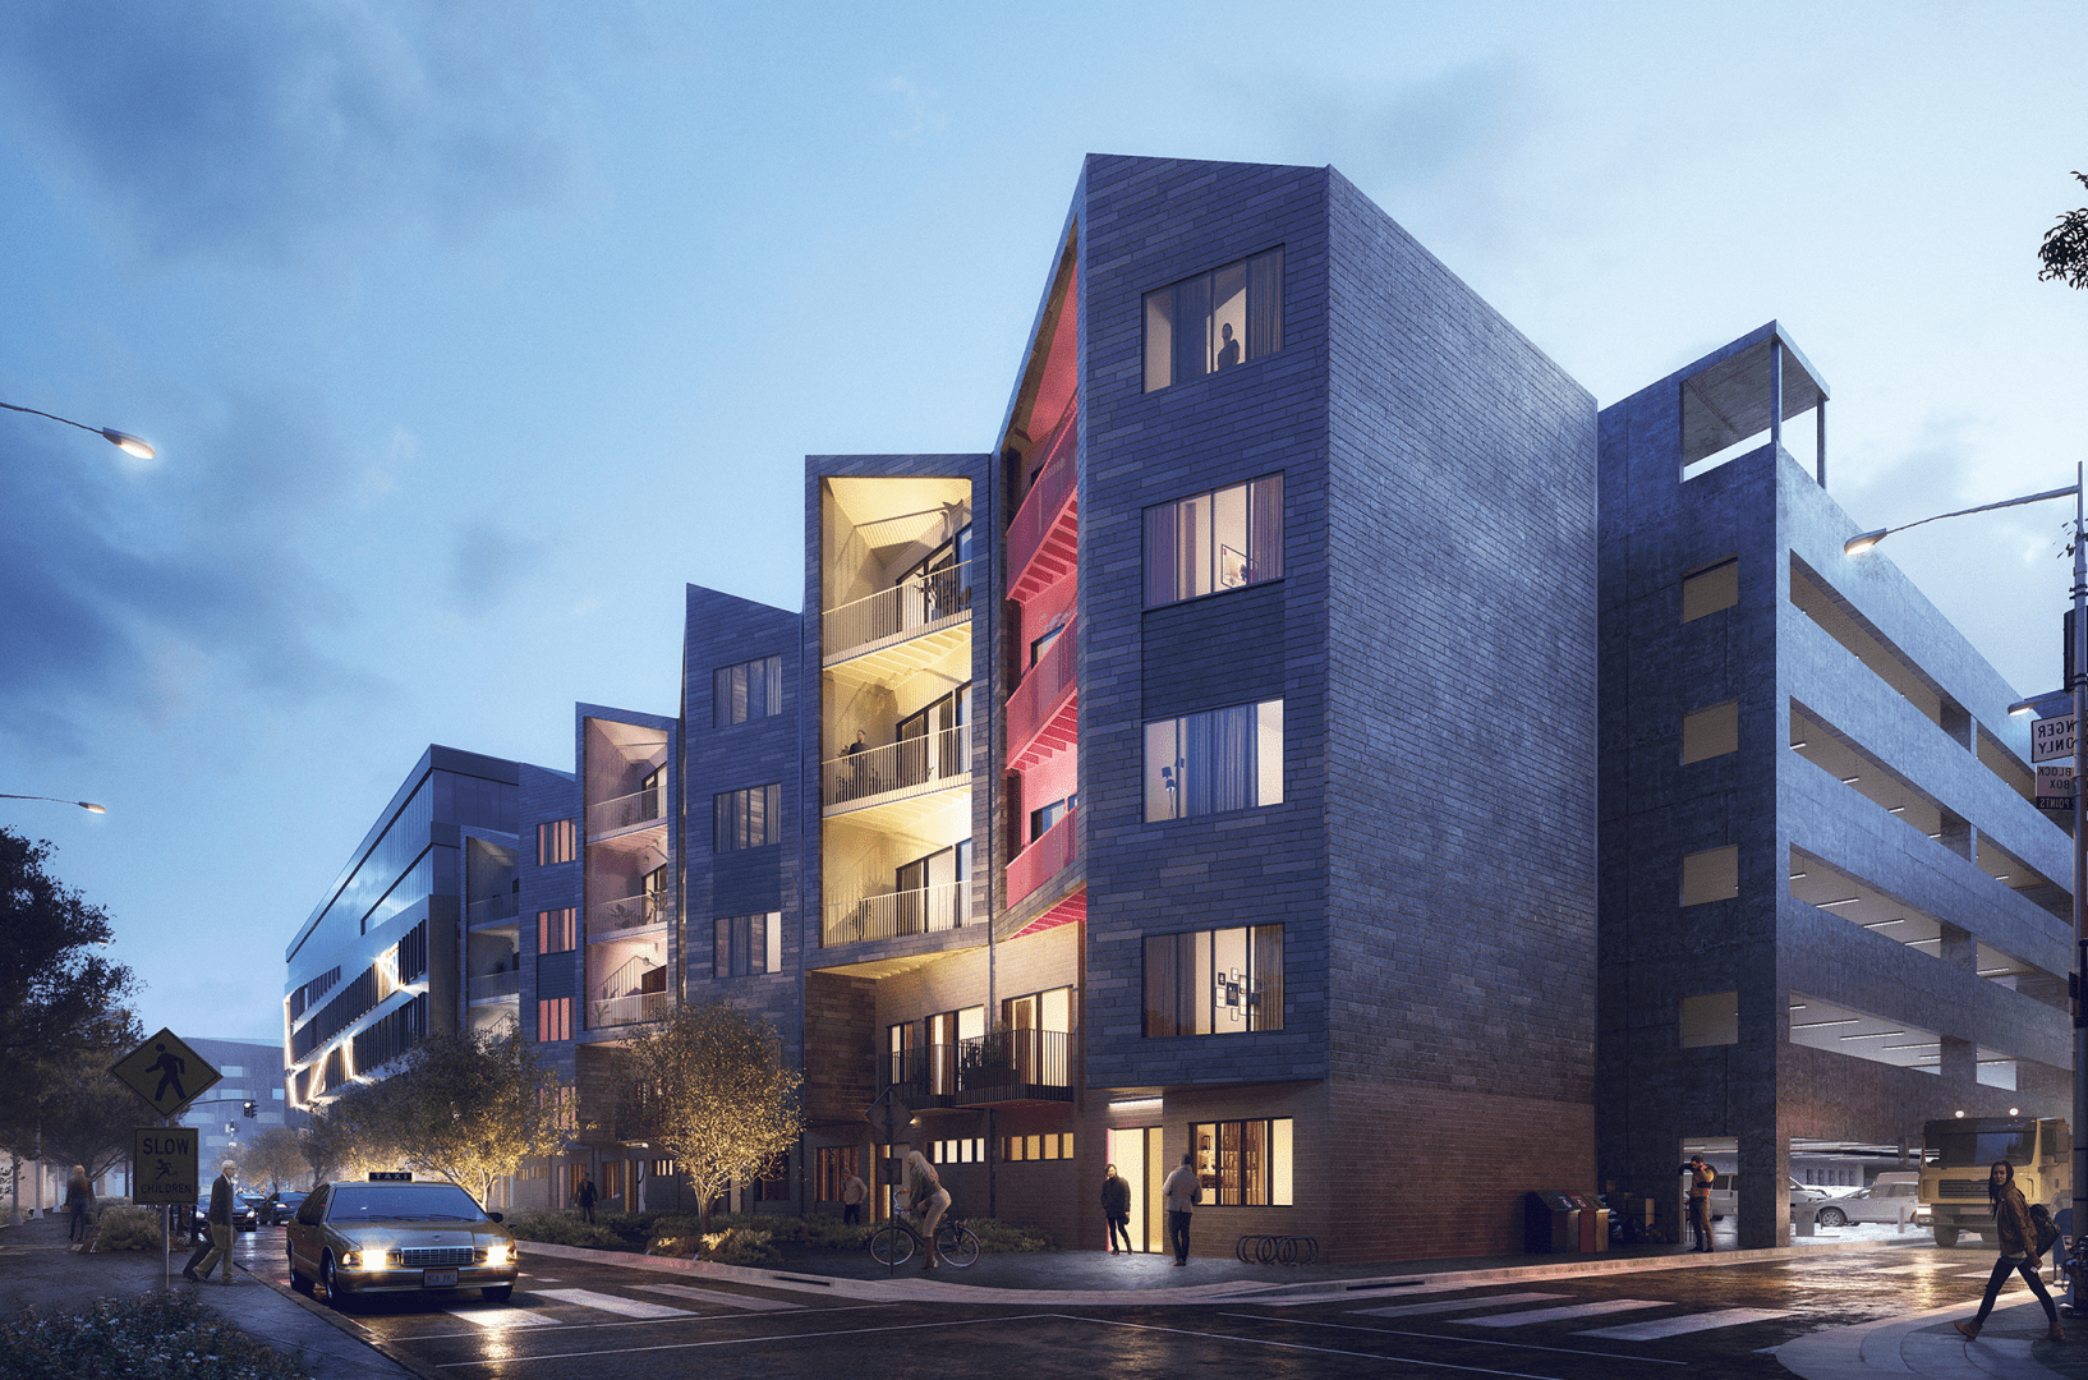 Gravity Building E townhomes, McDowell St, Columbus, OH 43215. Offering urban sophistication, luxury living, and amenities including fitness center, yoga studio, rooftop terraces, and more.